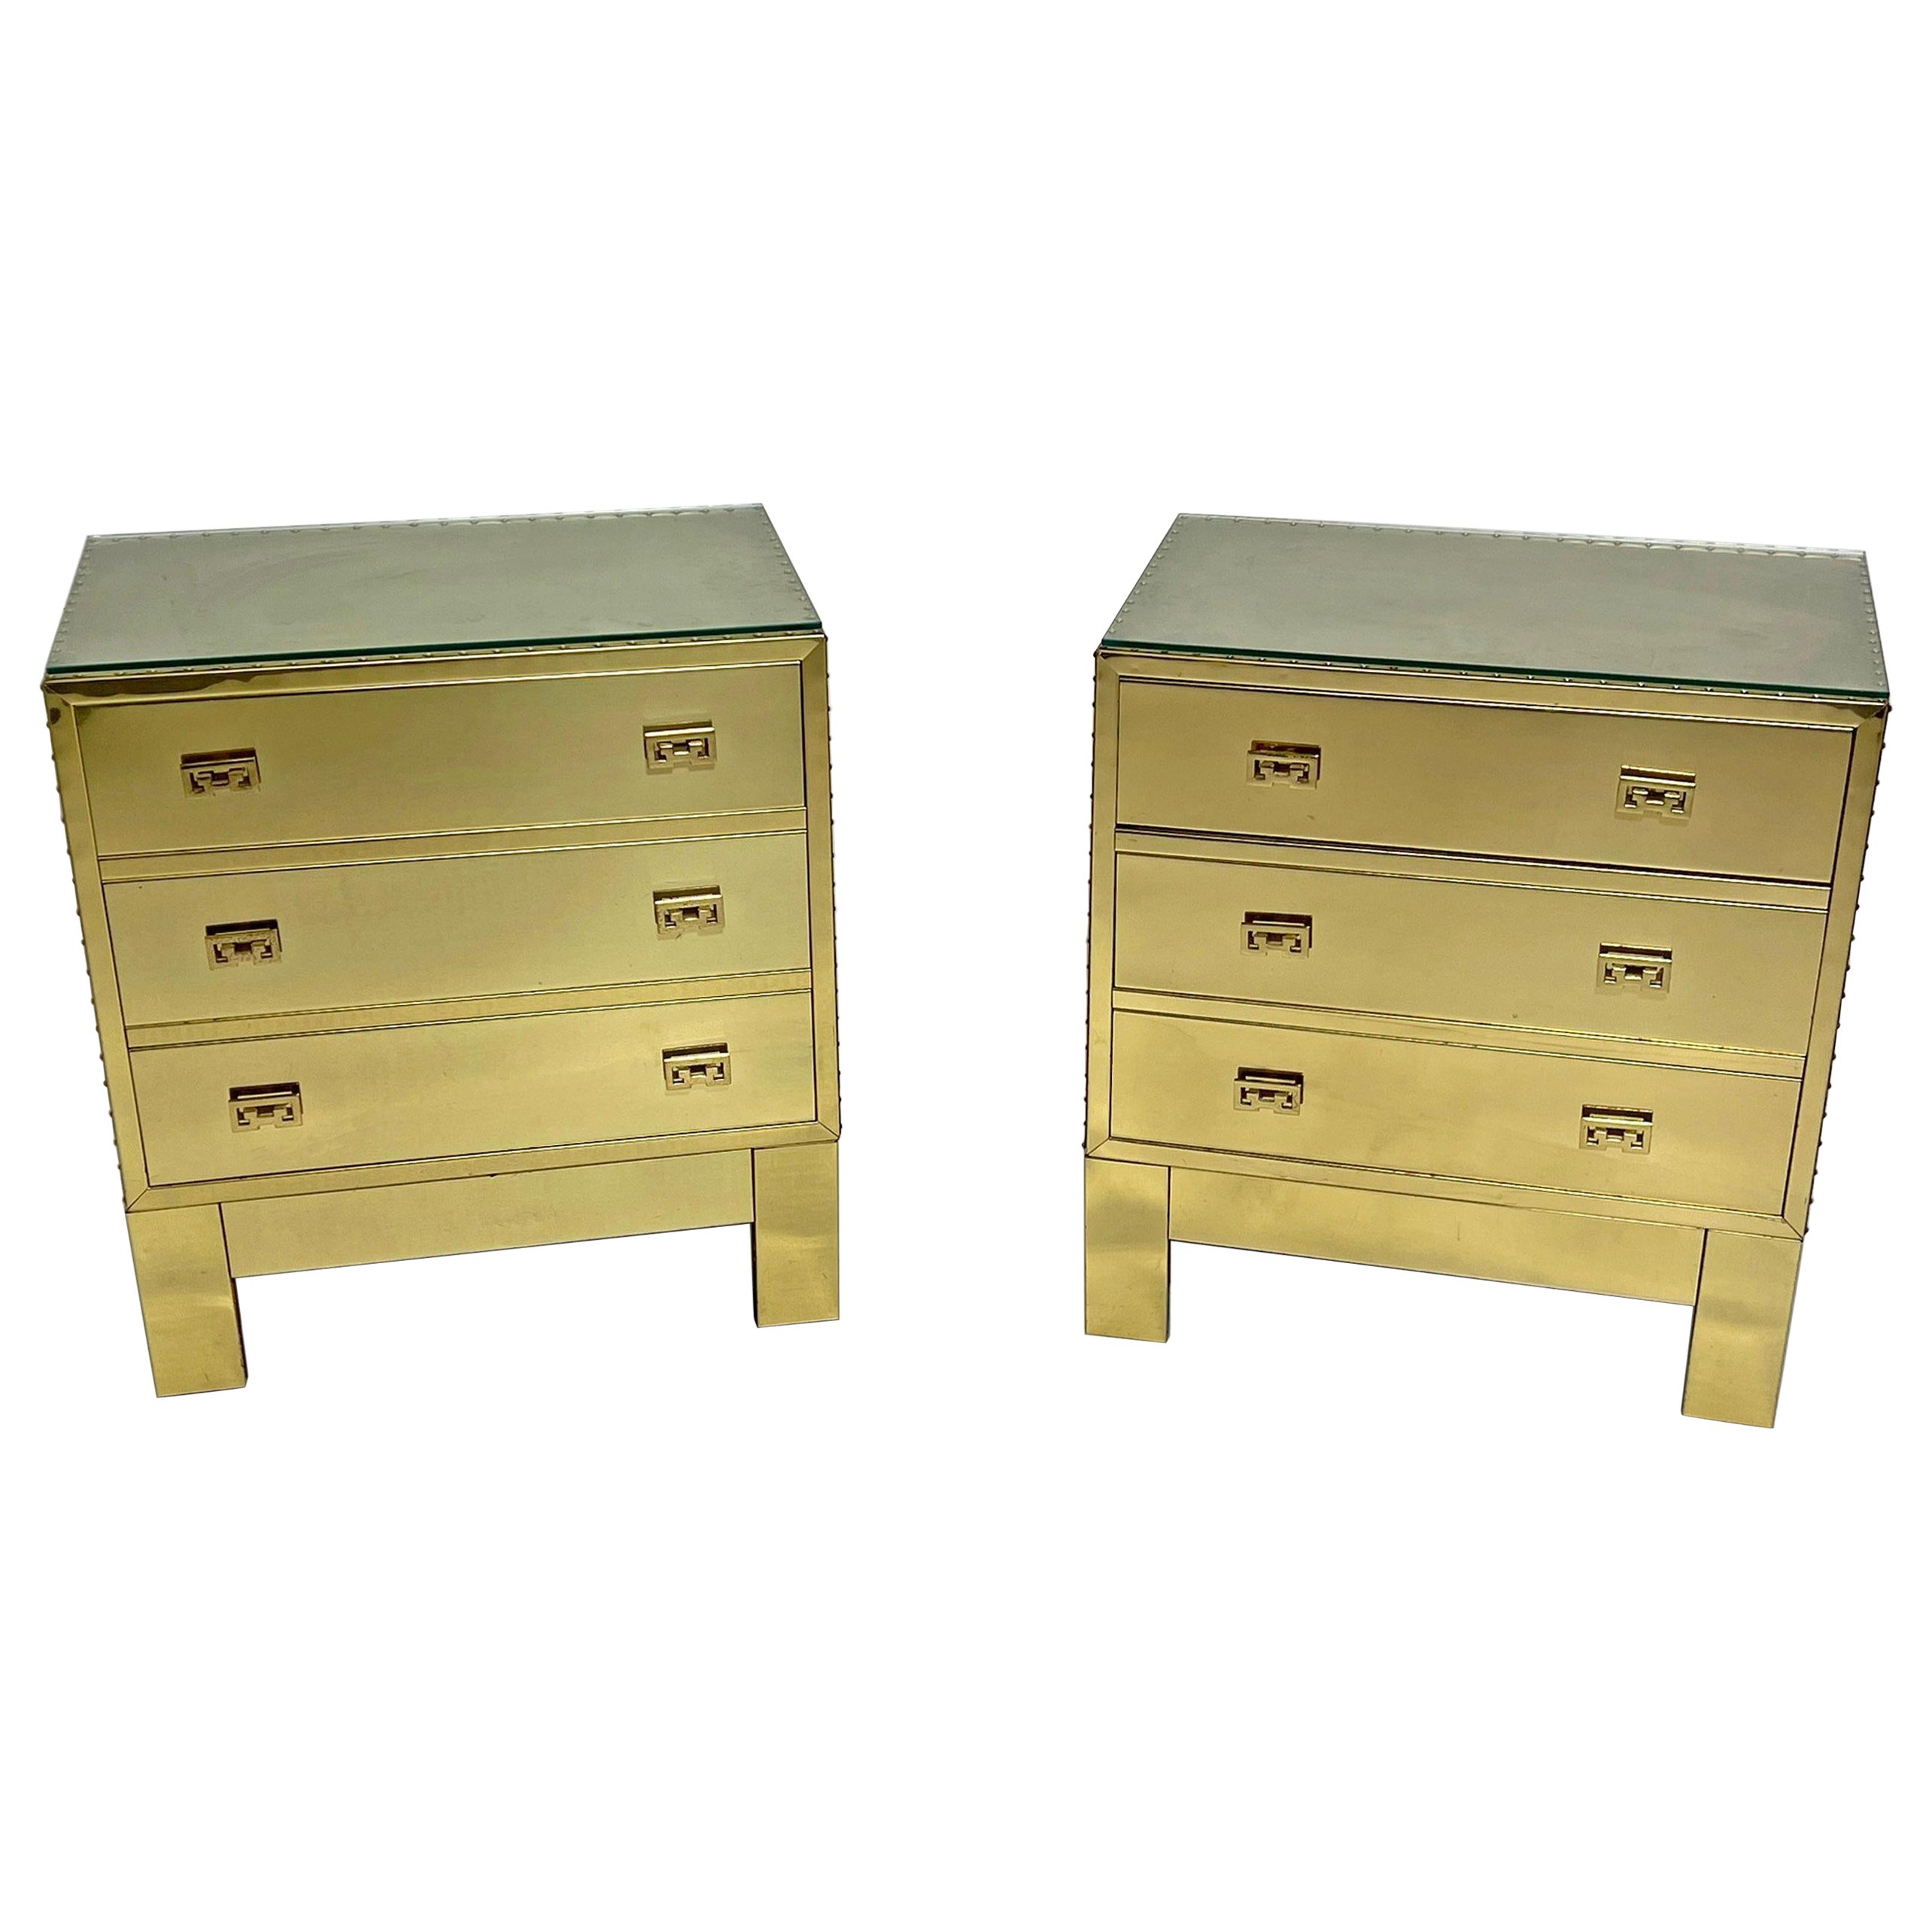 Pair of Three Drawer Brass Clad Chests in Manner of Sarreid, Circa 1970s For Sale